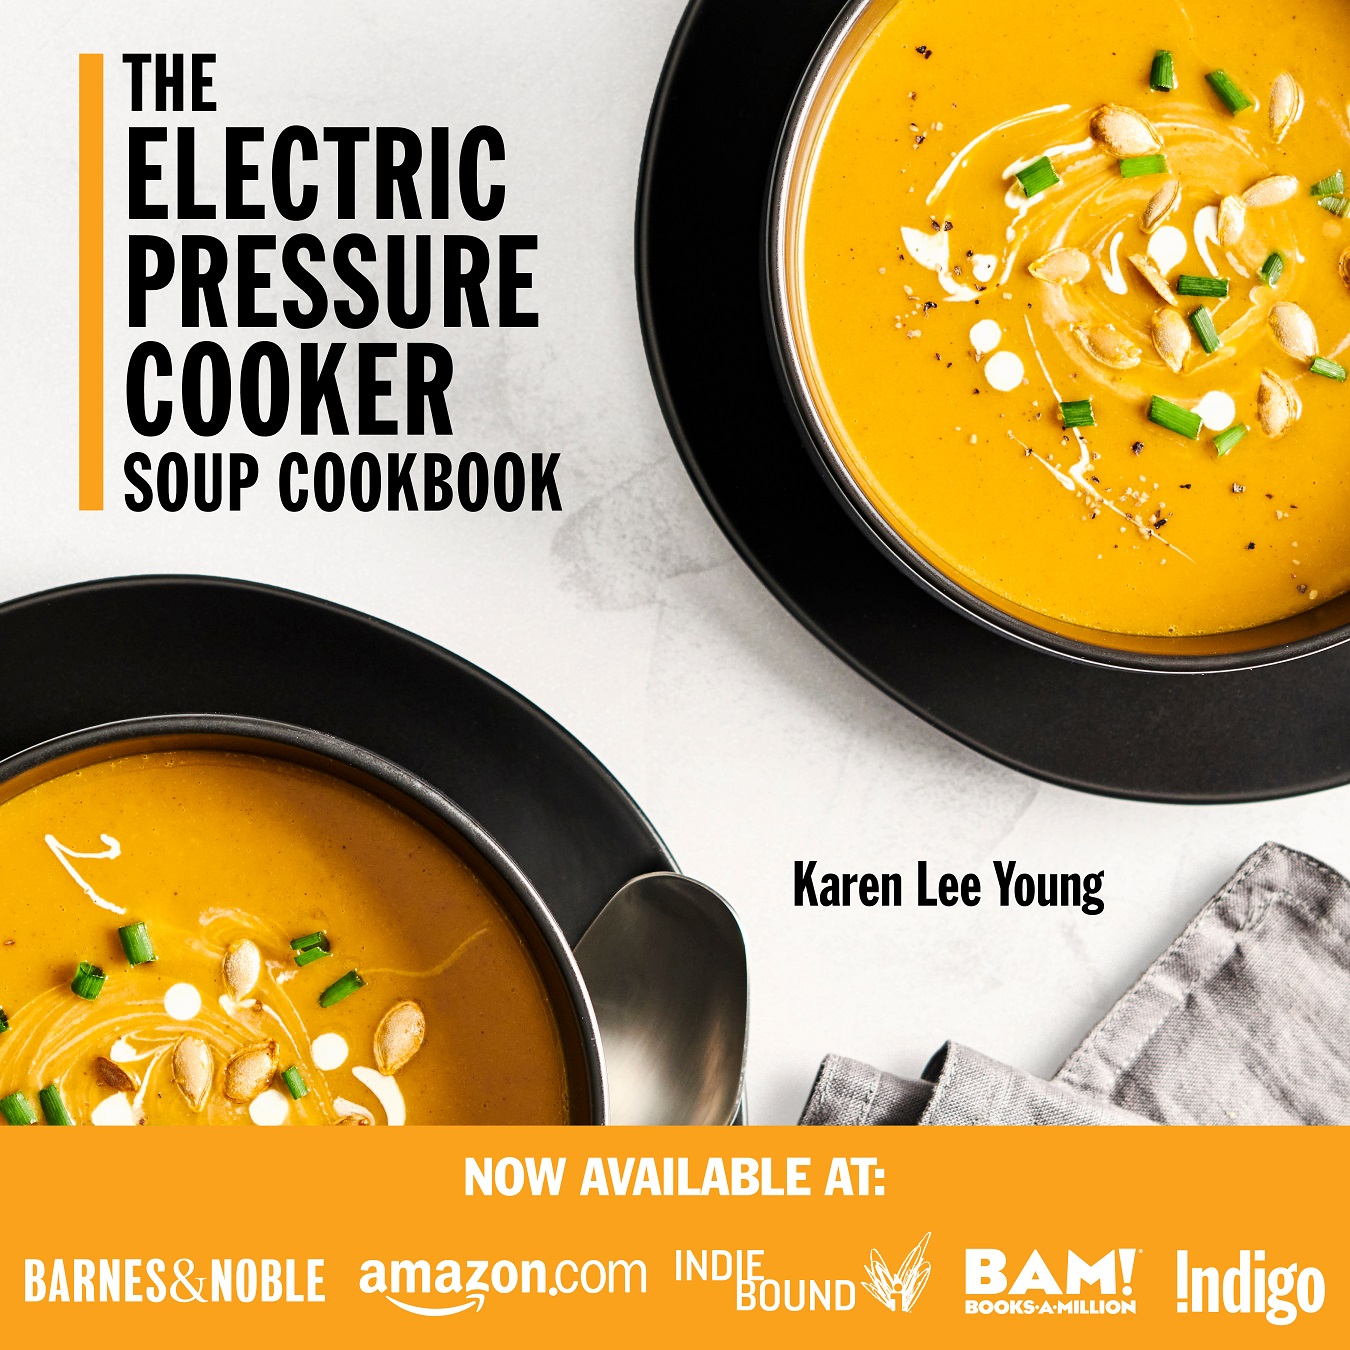 The Electric Pressure Cooker Soup Cookbook